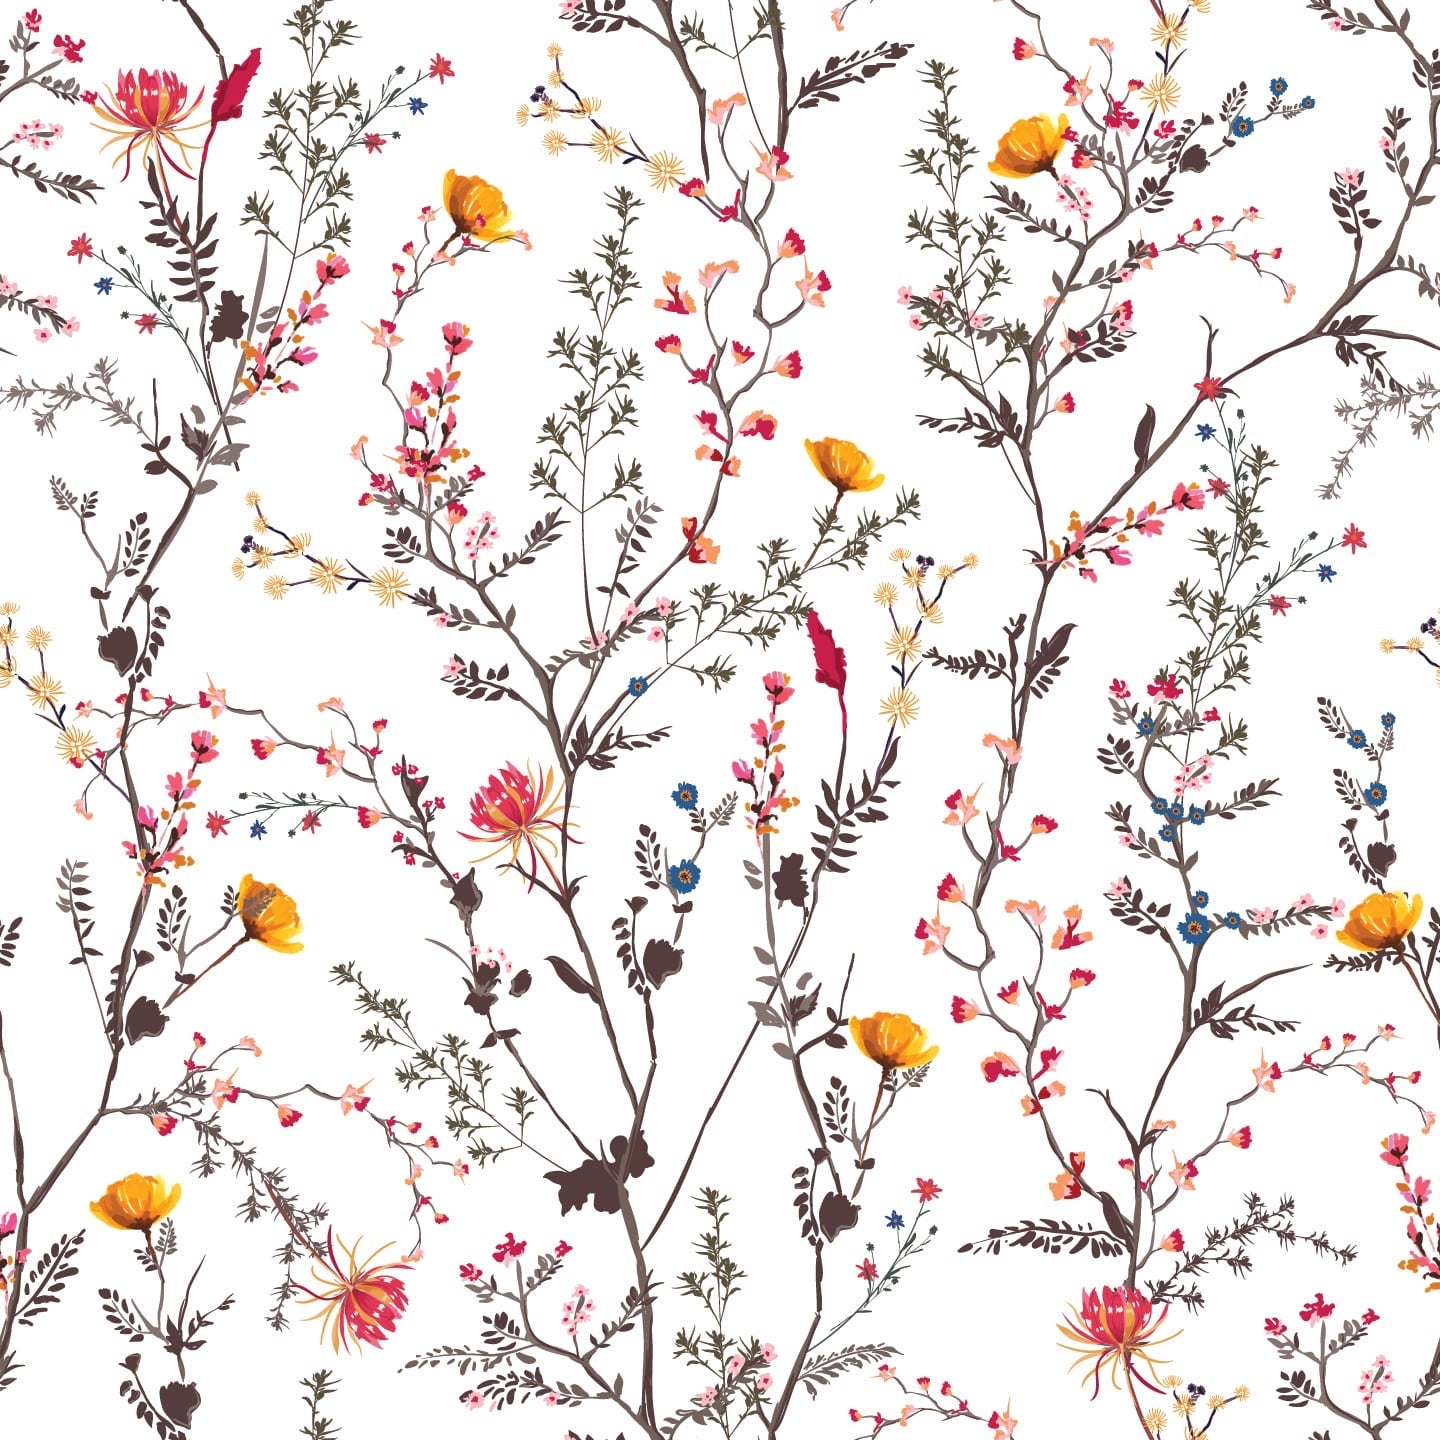 Sweet Wildflower Print Peel-and-Stick or Traditional Wallpaper for yourHome, Camper van, or Vintage Trailer,